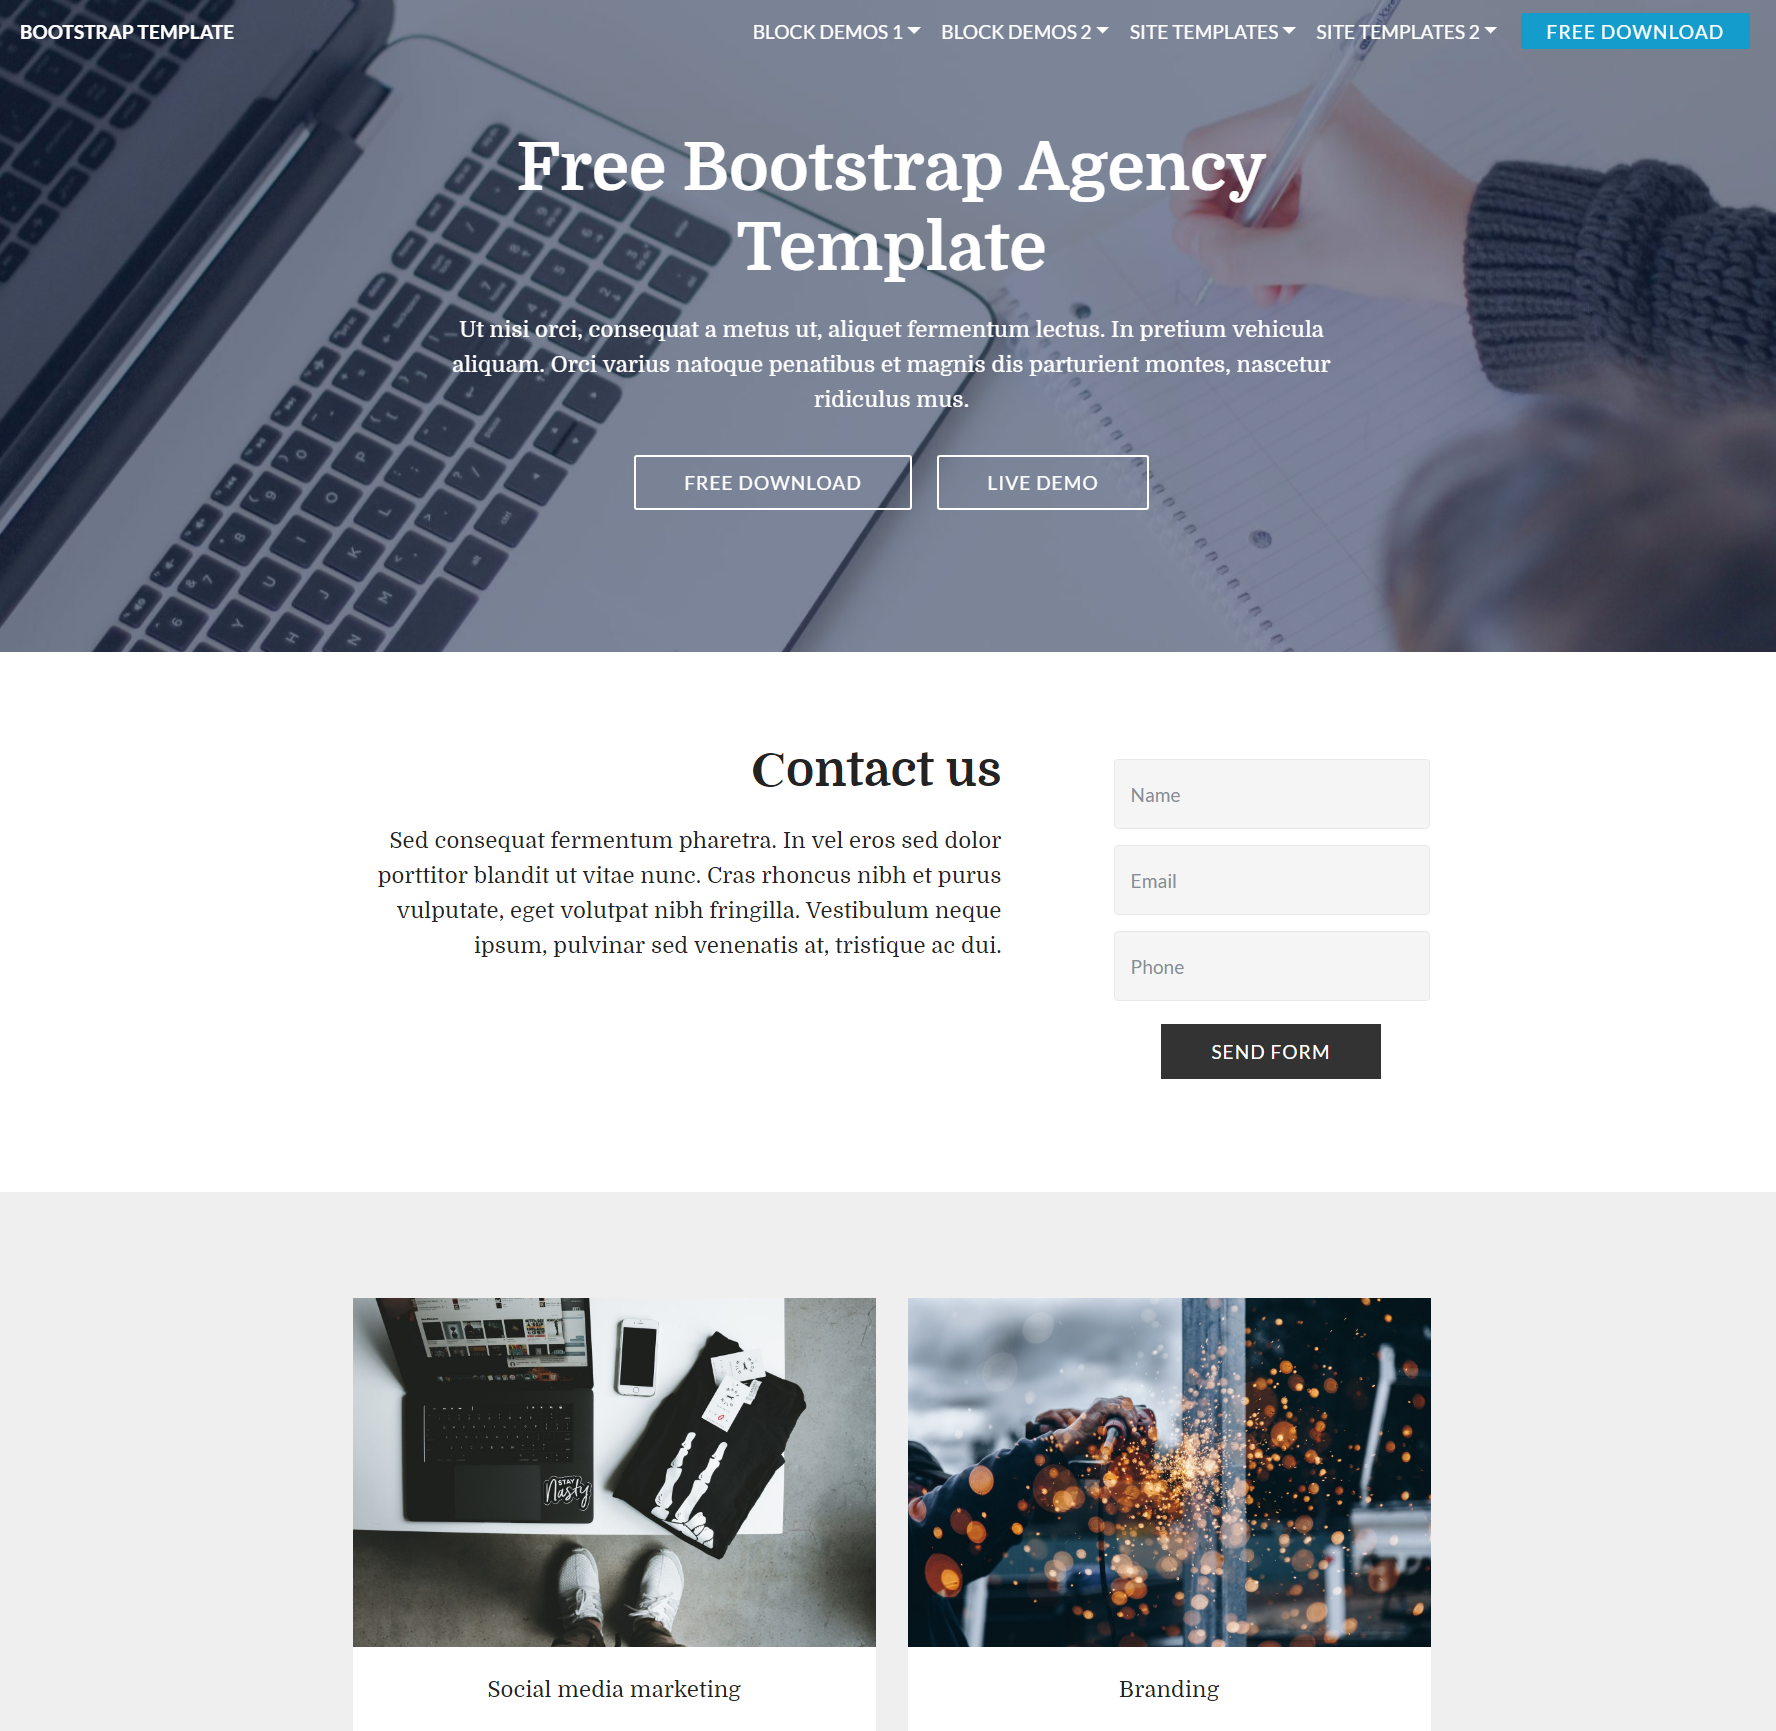 Free Bootstrap Agency Templates